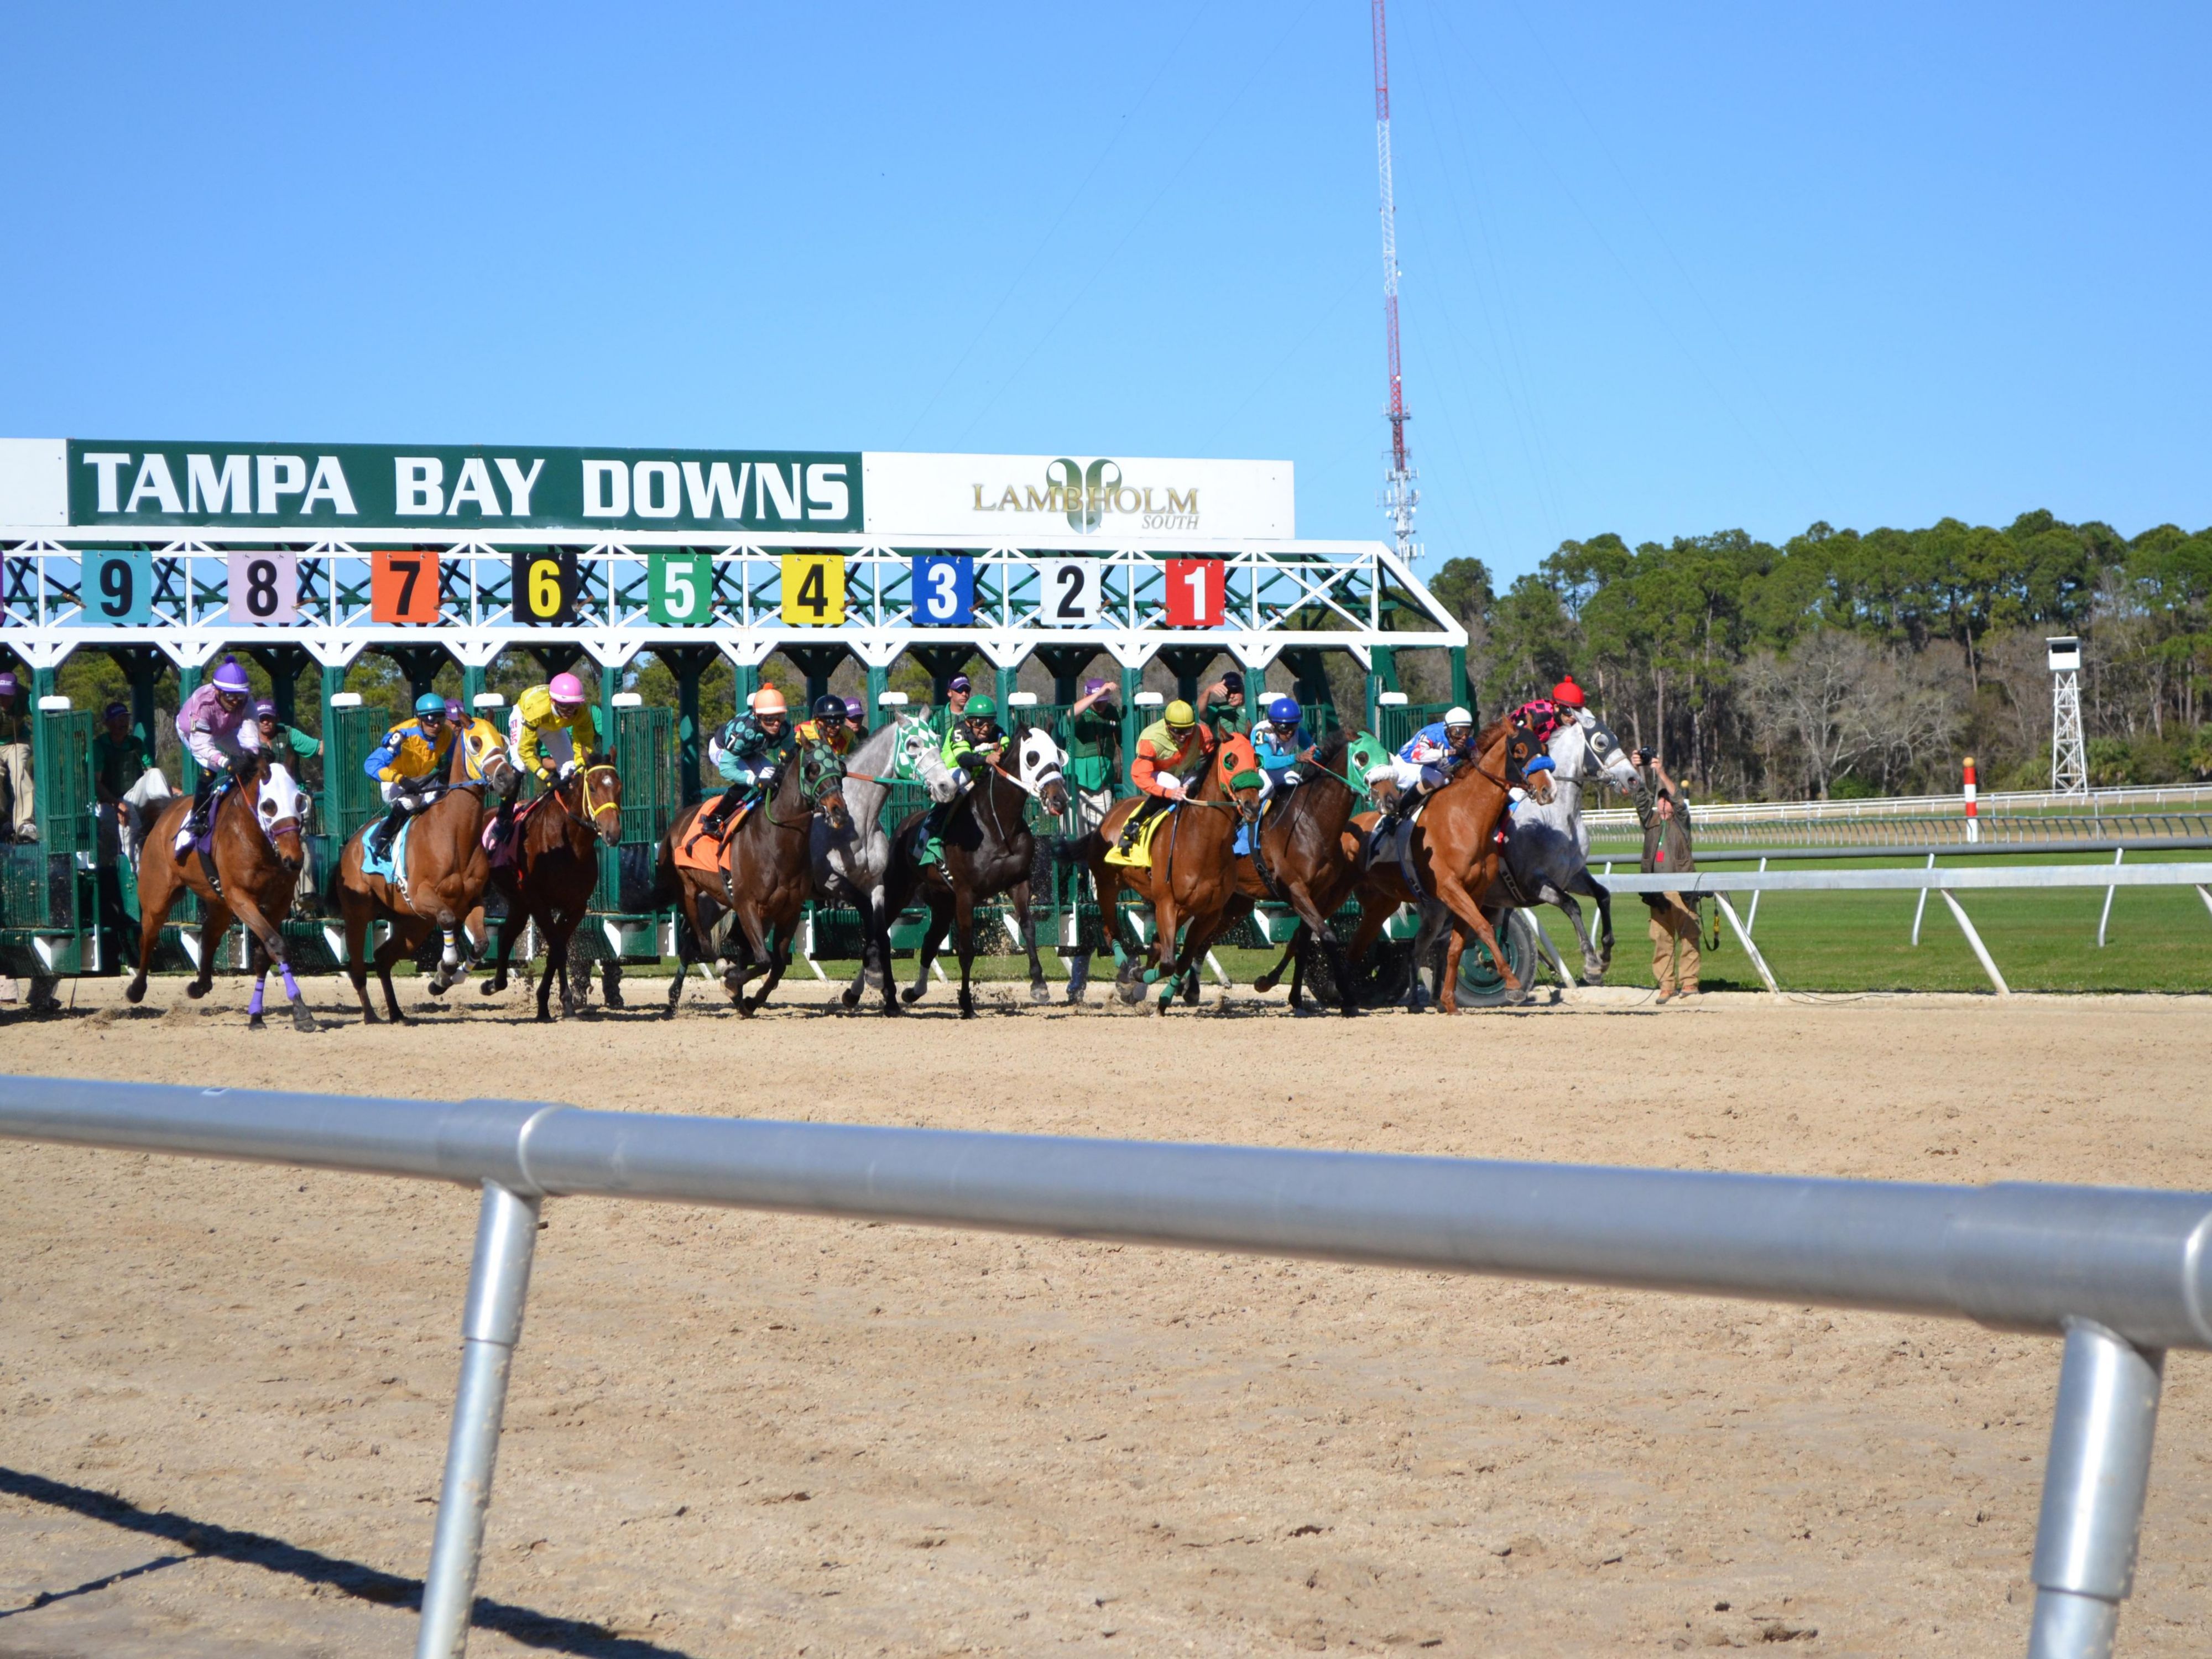 Tampa Bay Downs is a great way to spend the day in Tampa Bay!